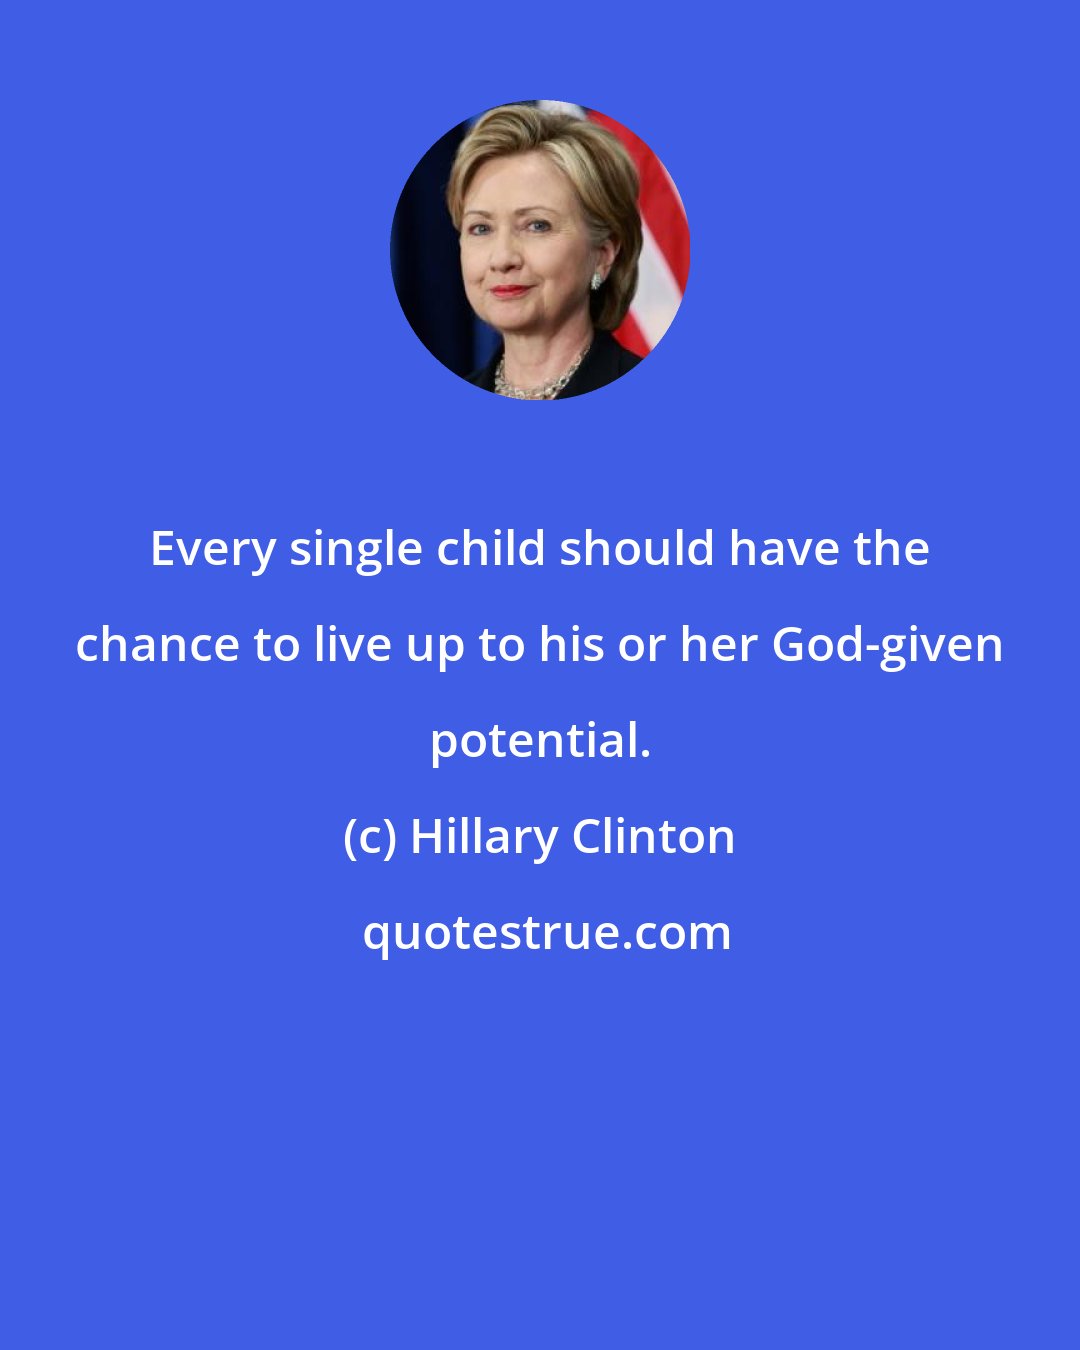 Hillary Clinton: Every single child should have the chance to live up to his or her God-given potential.